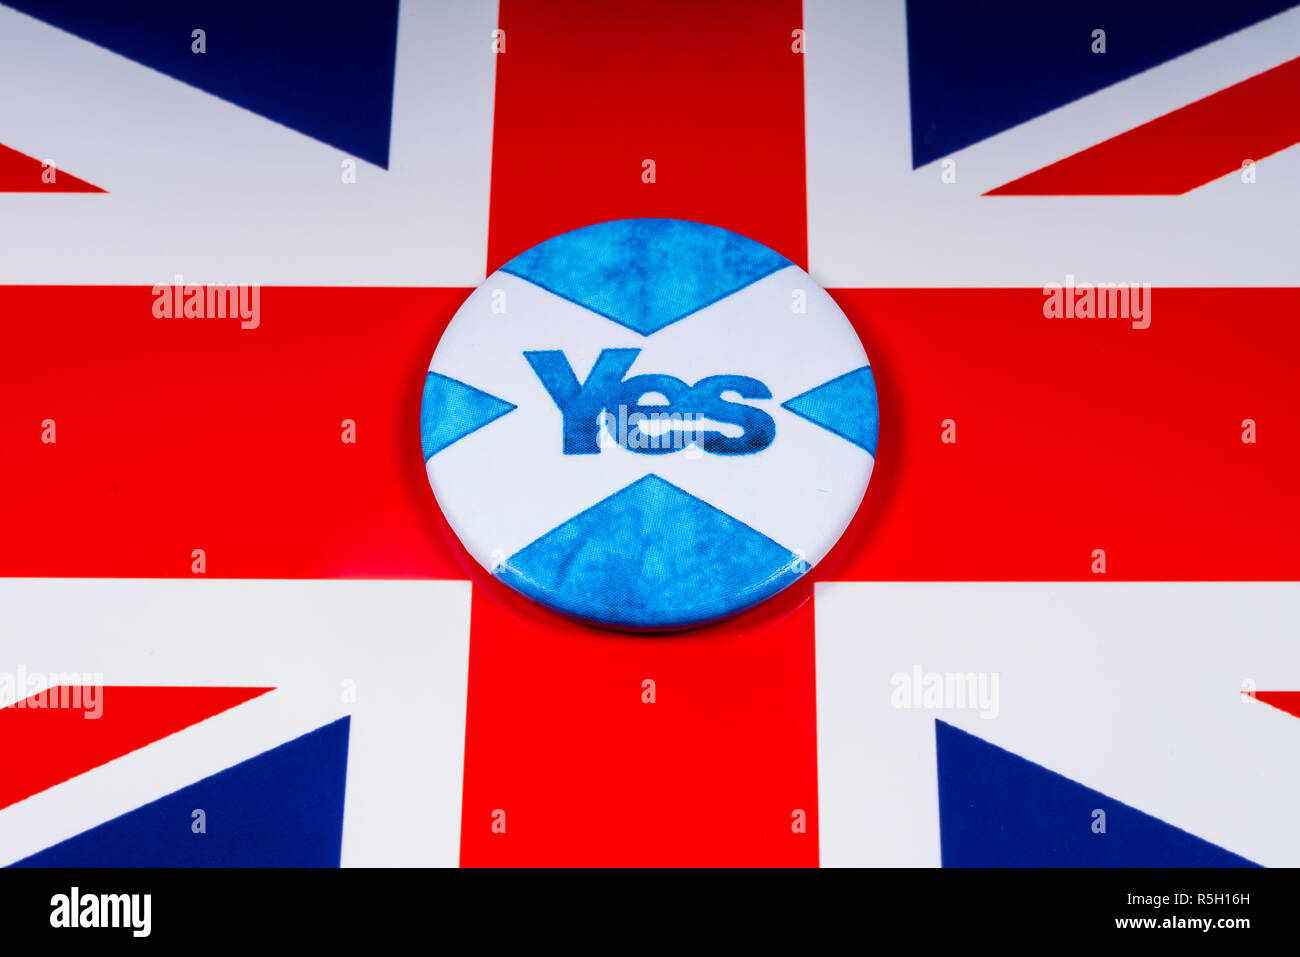 London, UK - November 18th 2018: A pin badge portraying the Scottish flag and a Yes Vote for the Scottish Independence Referendum, pictured over a UK  Stock Photo